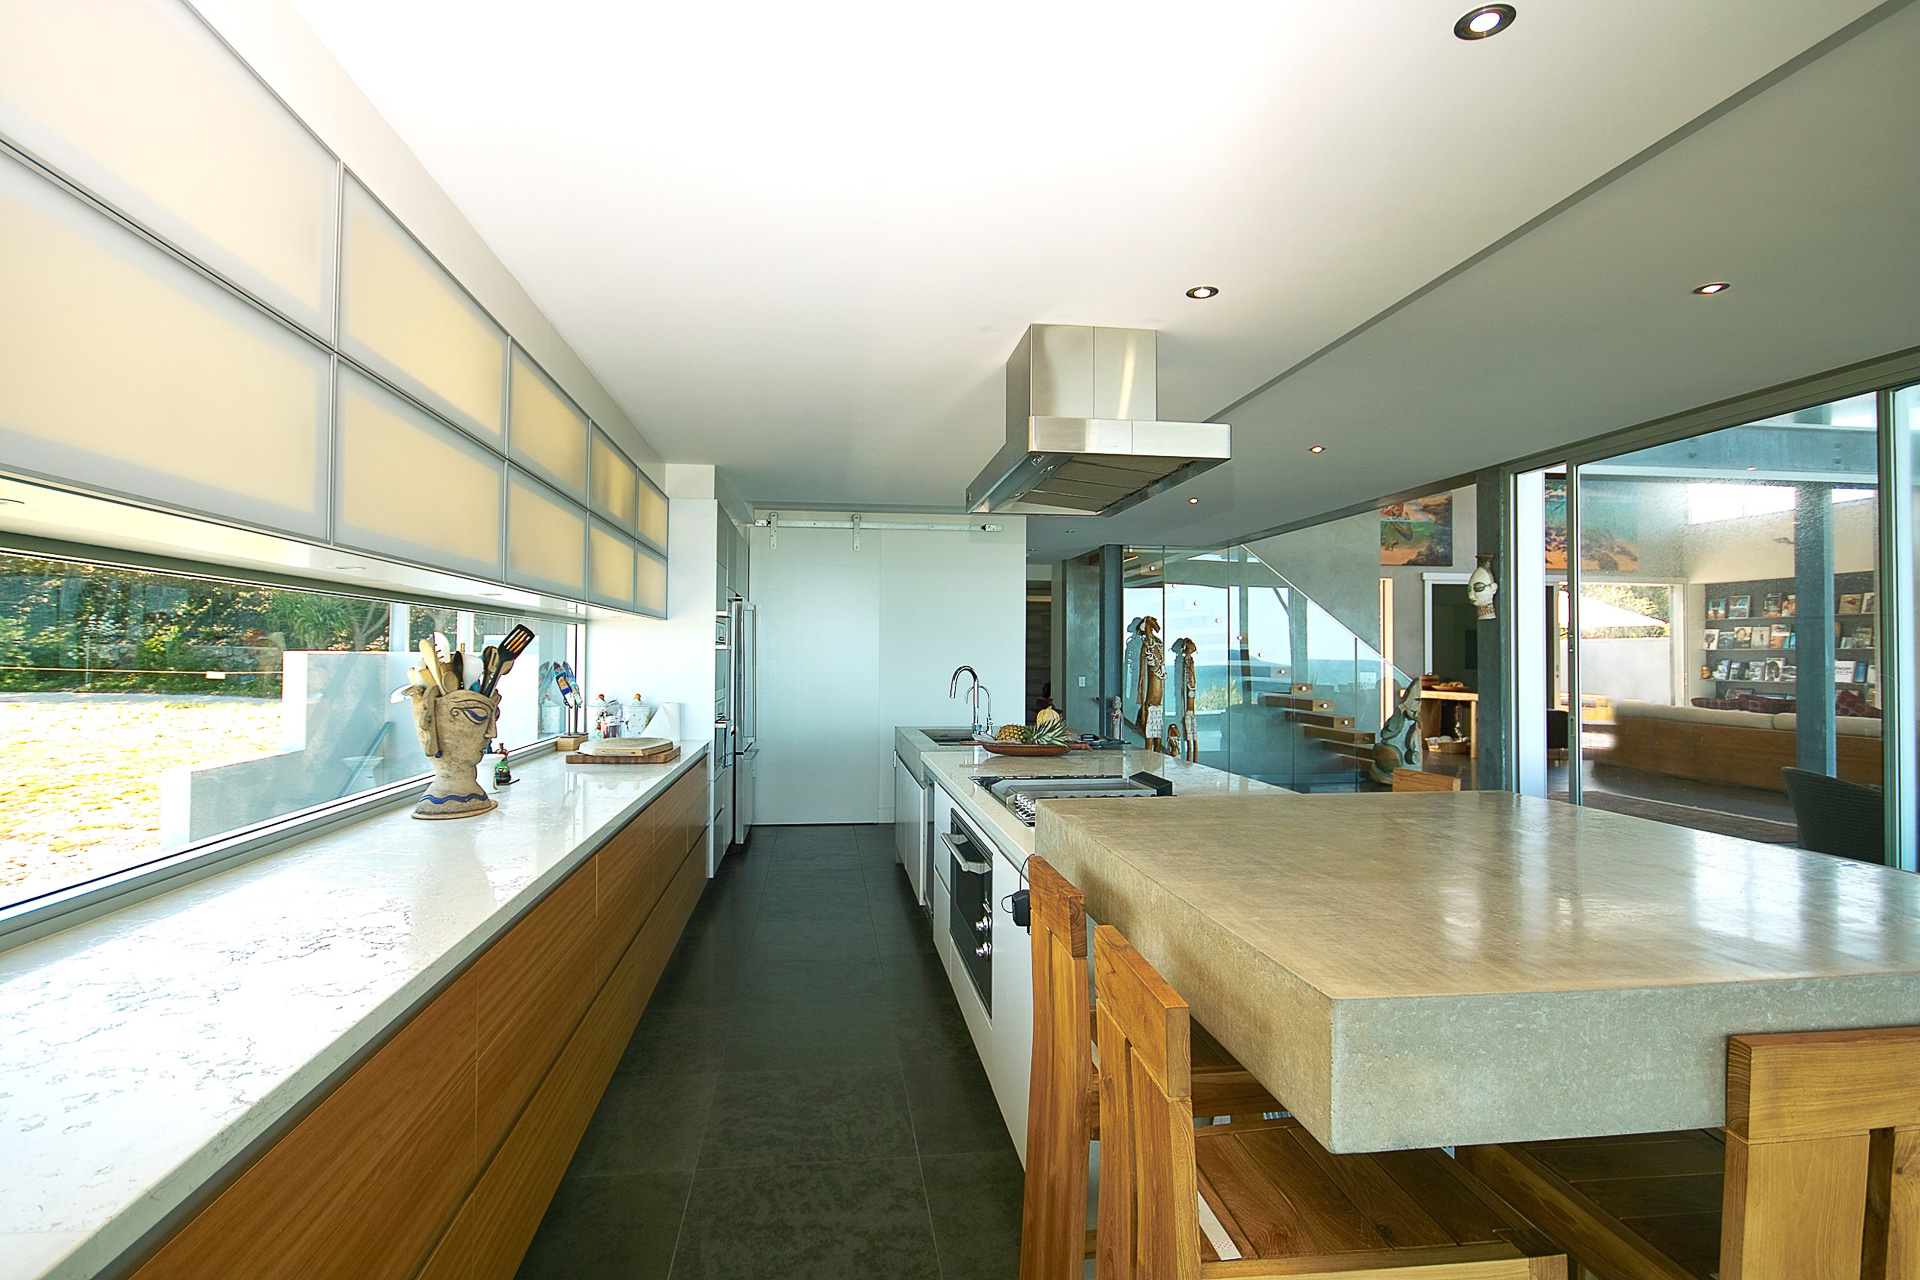 Kitchen, miele, interior, concrete island bench, marble tops, blum, Architectural, industrial, interiors, acrylic, minka joinery